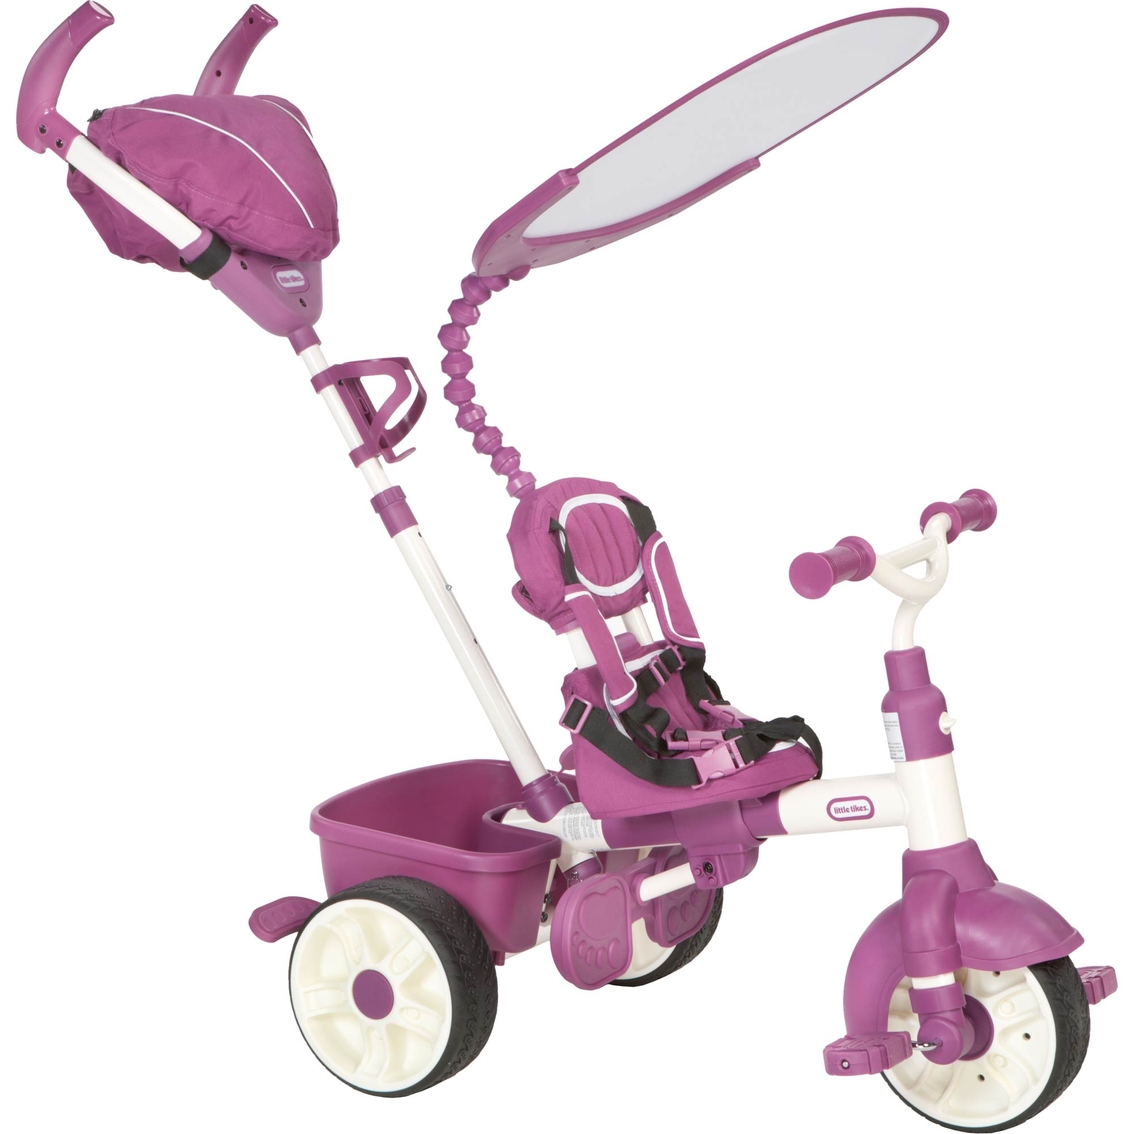 Little Tikes 4 in 1 Sports Edition Trike, Pink - Image 3 of 4